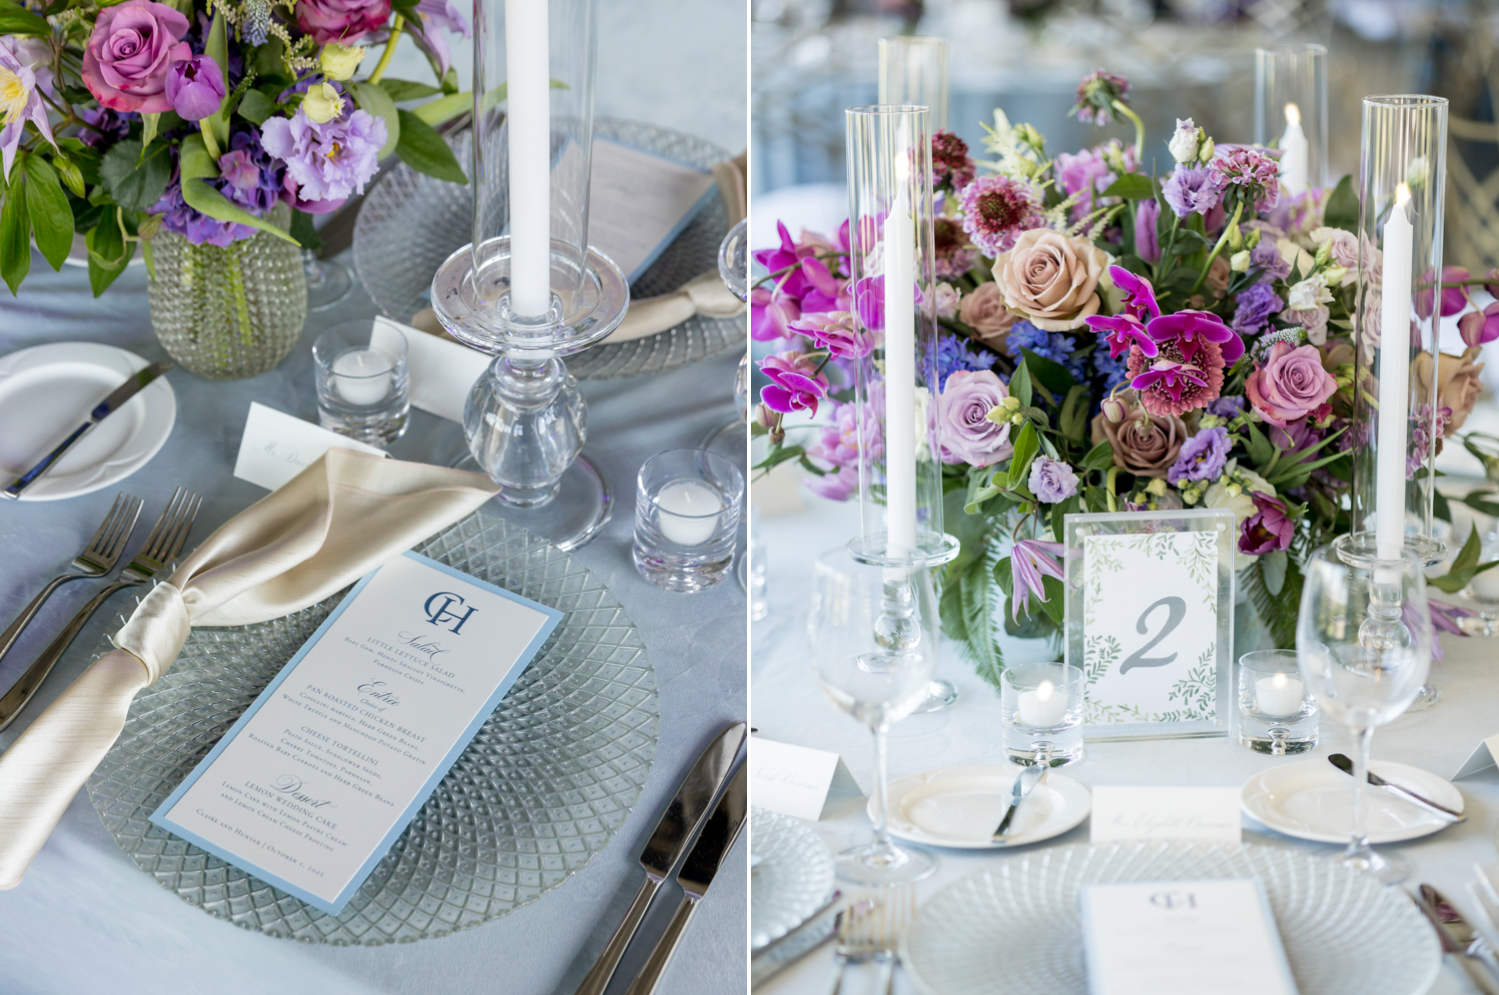 Left: A blue and white menu sits on a crystal plate at the reception dinner table. Right: A details shot of the table numbers and flowers at each table.